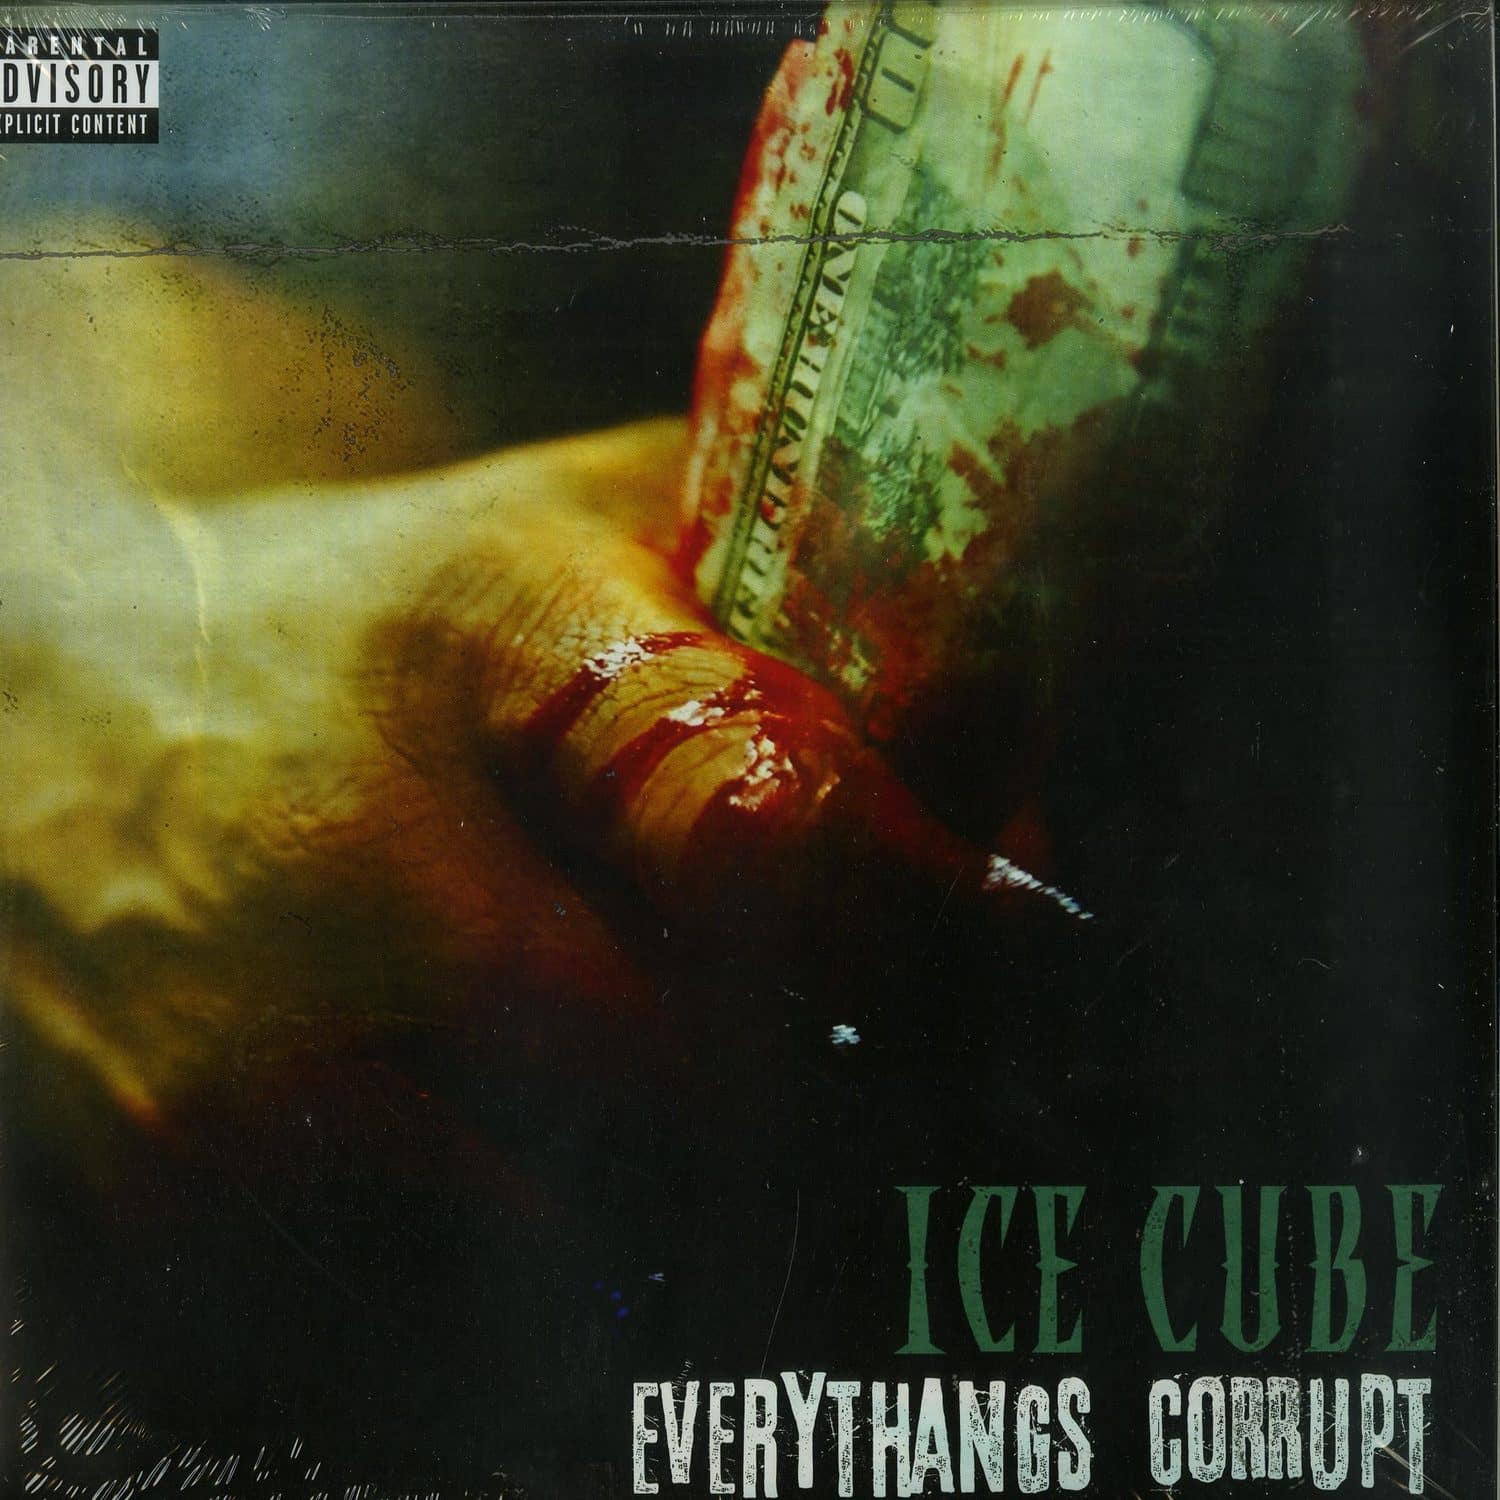 Ice Cube - EVERYTHANGS CORRUPT 